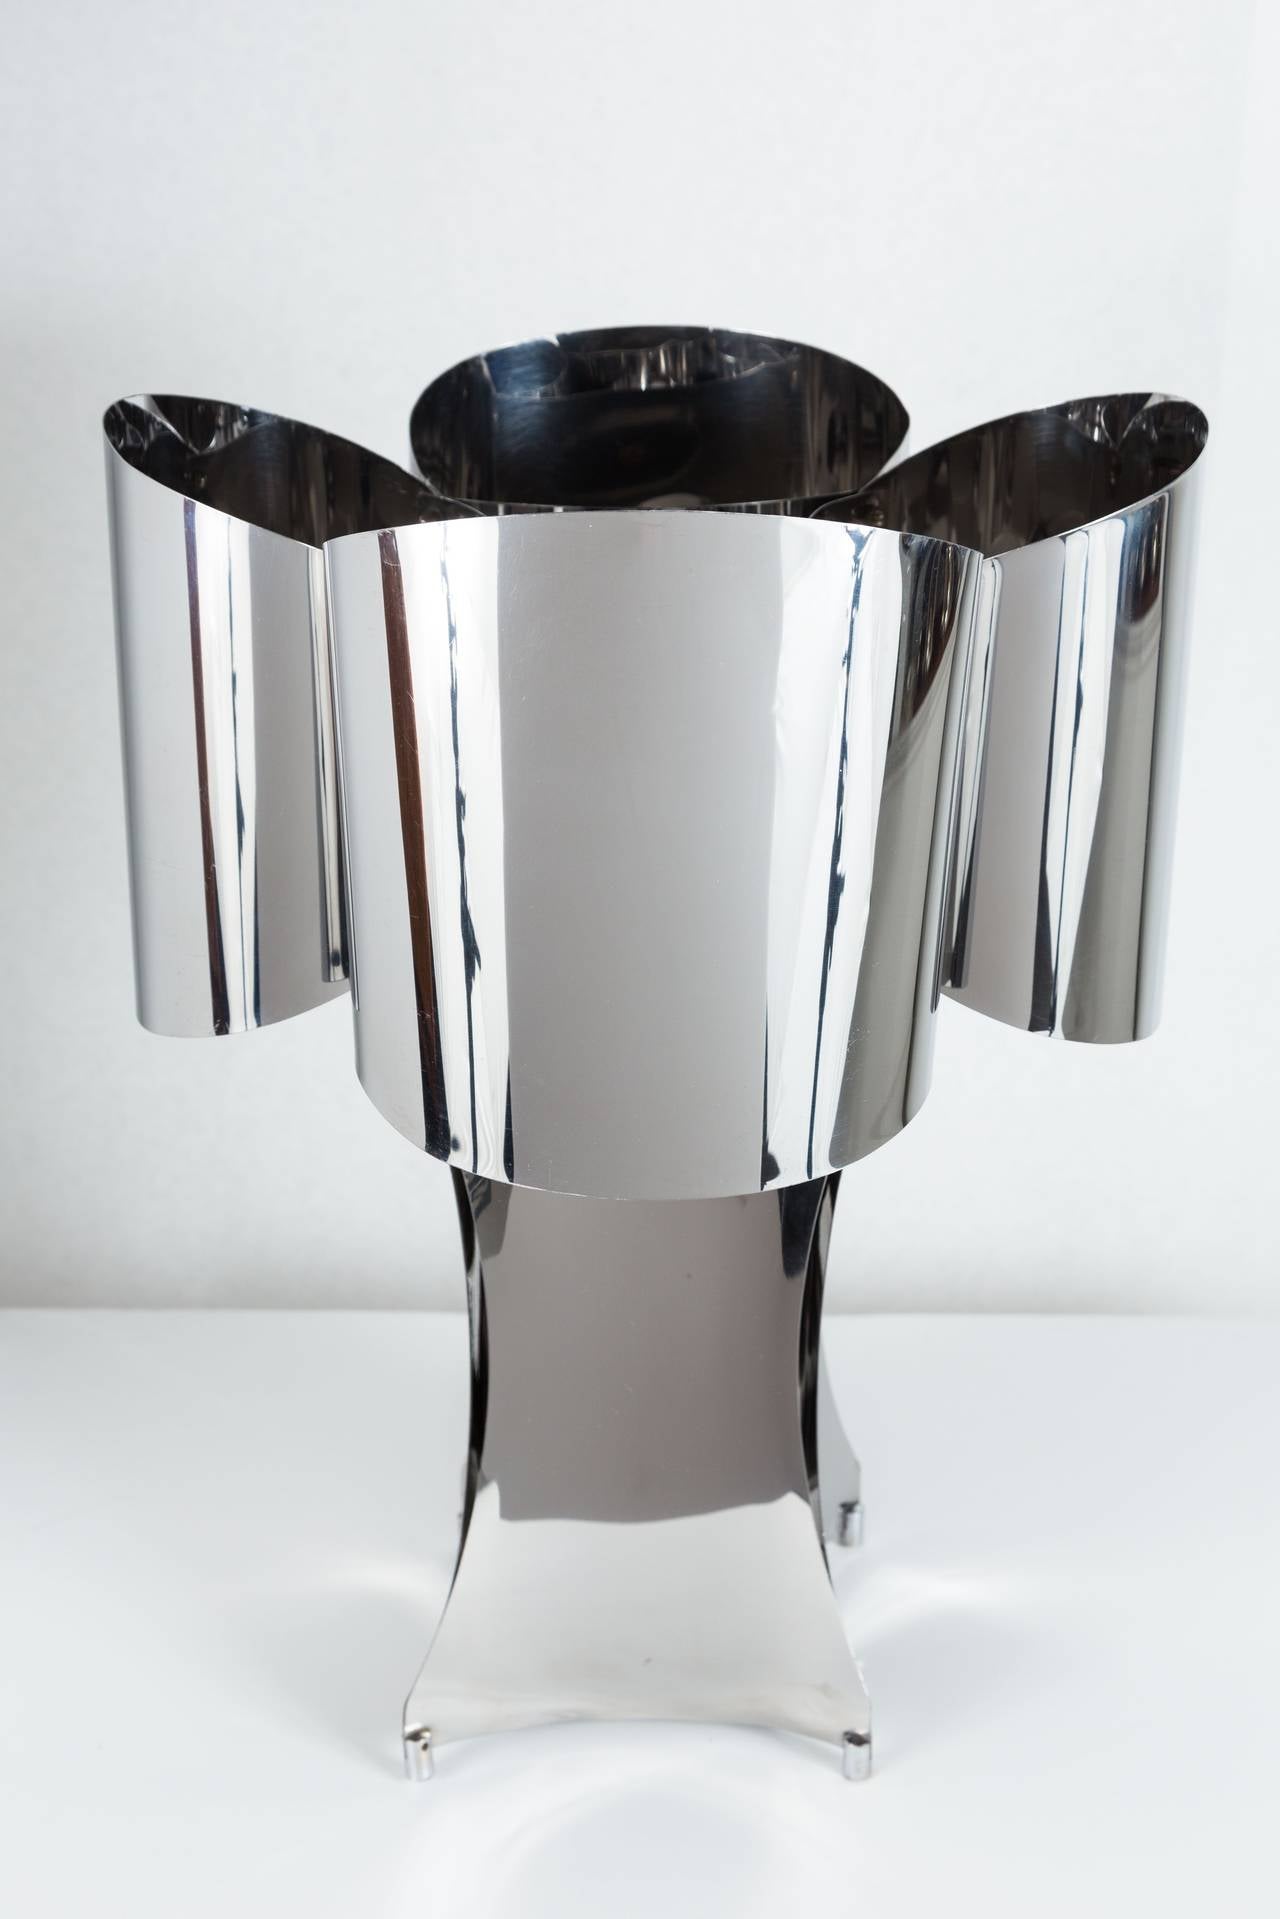 Attractive polished stainless steel table lamp with four standard European sockets (require adaptors for US bulbs), surrounded by gracefully shaped stainless 